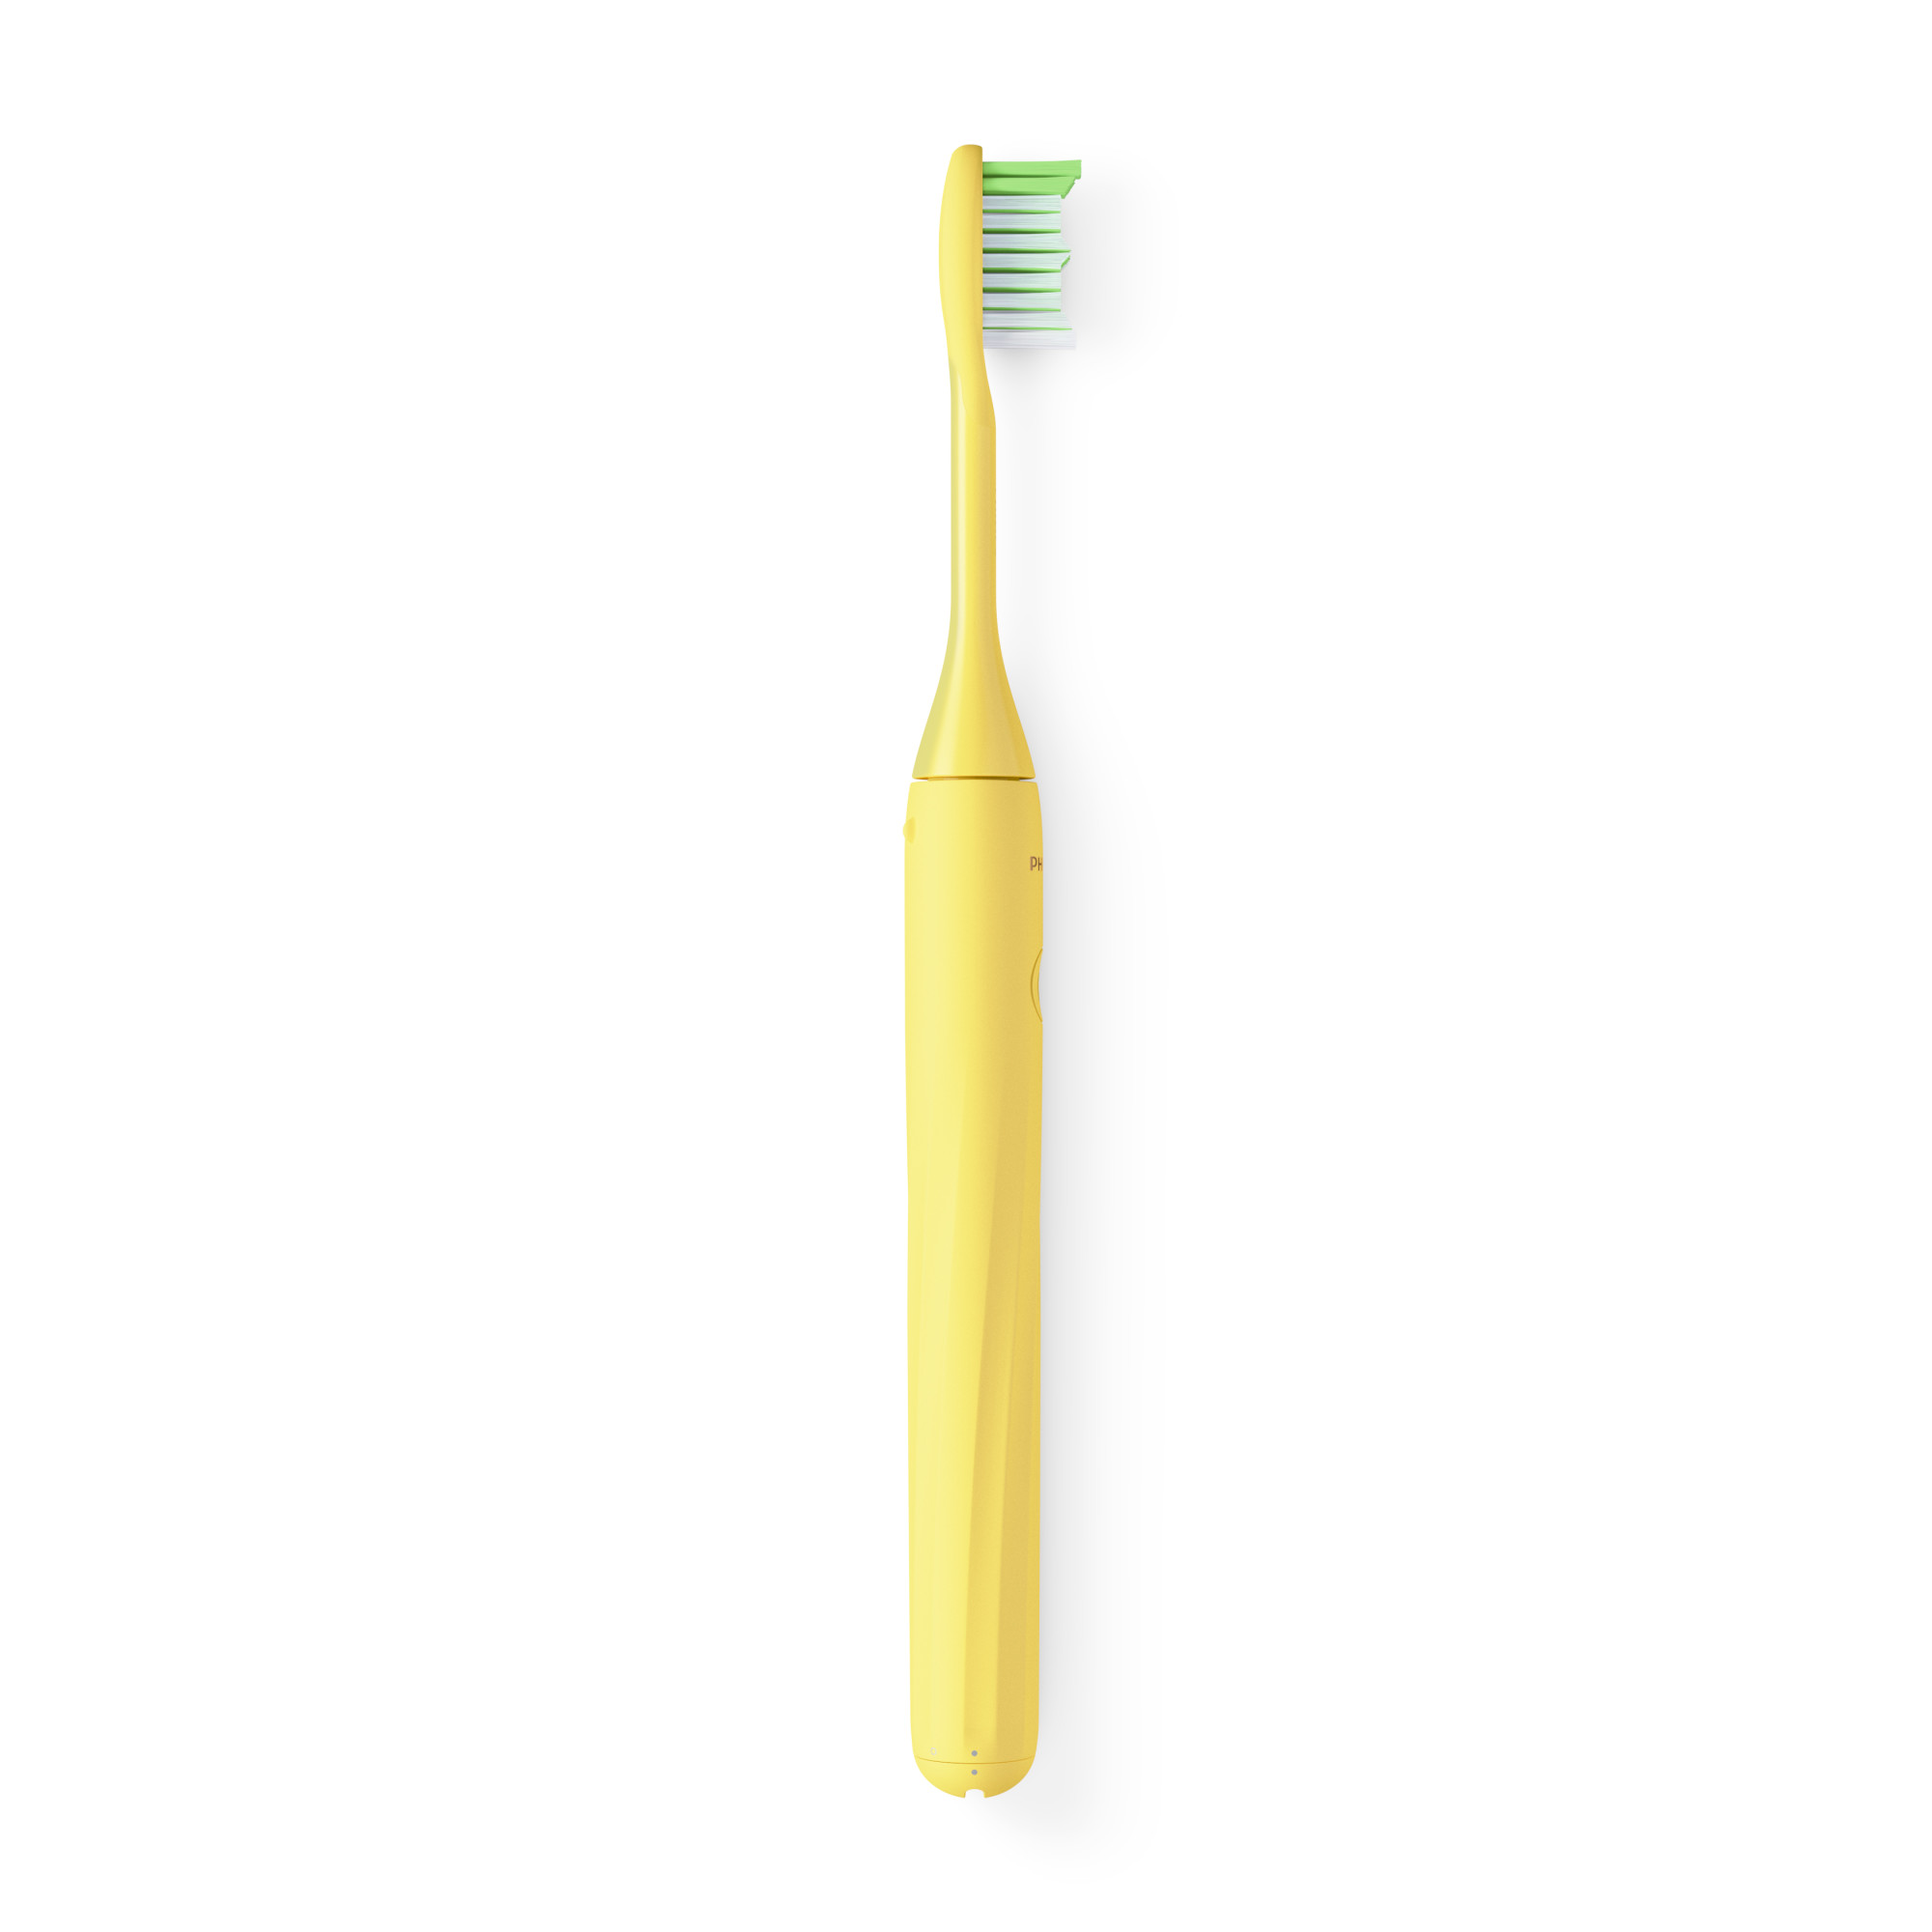 Philips One By Sonicare Battery Toothbrush, Mango, HY1100/02 - image 4 of 18